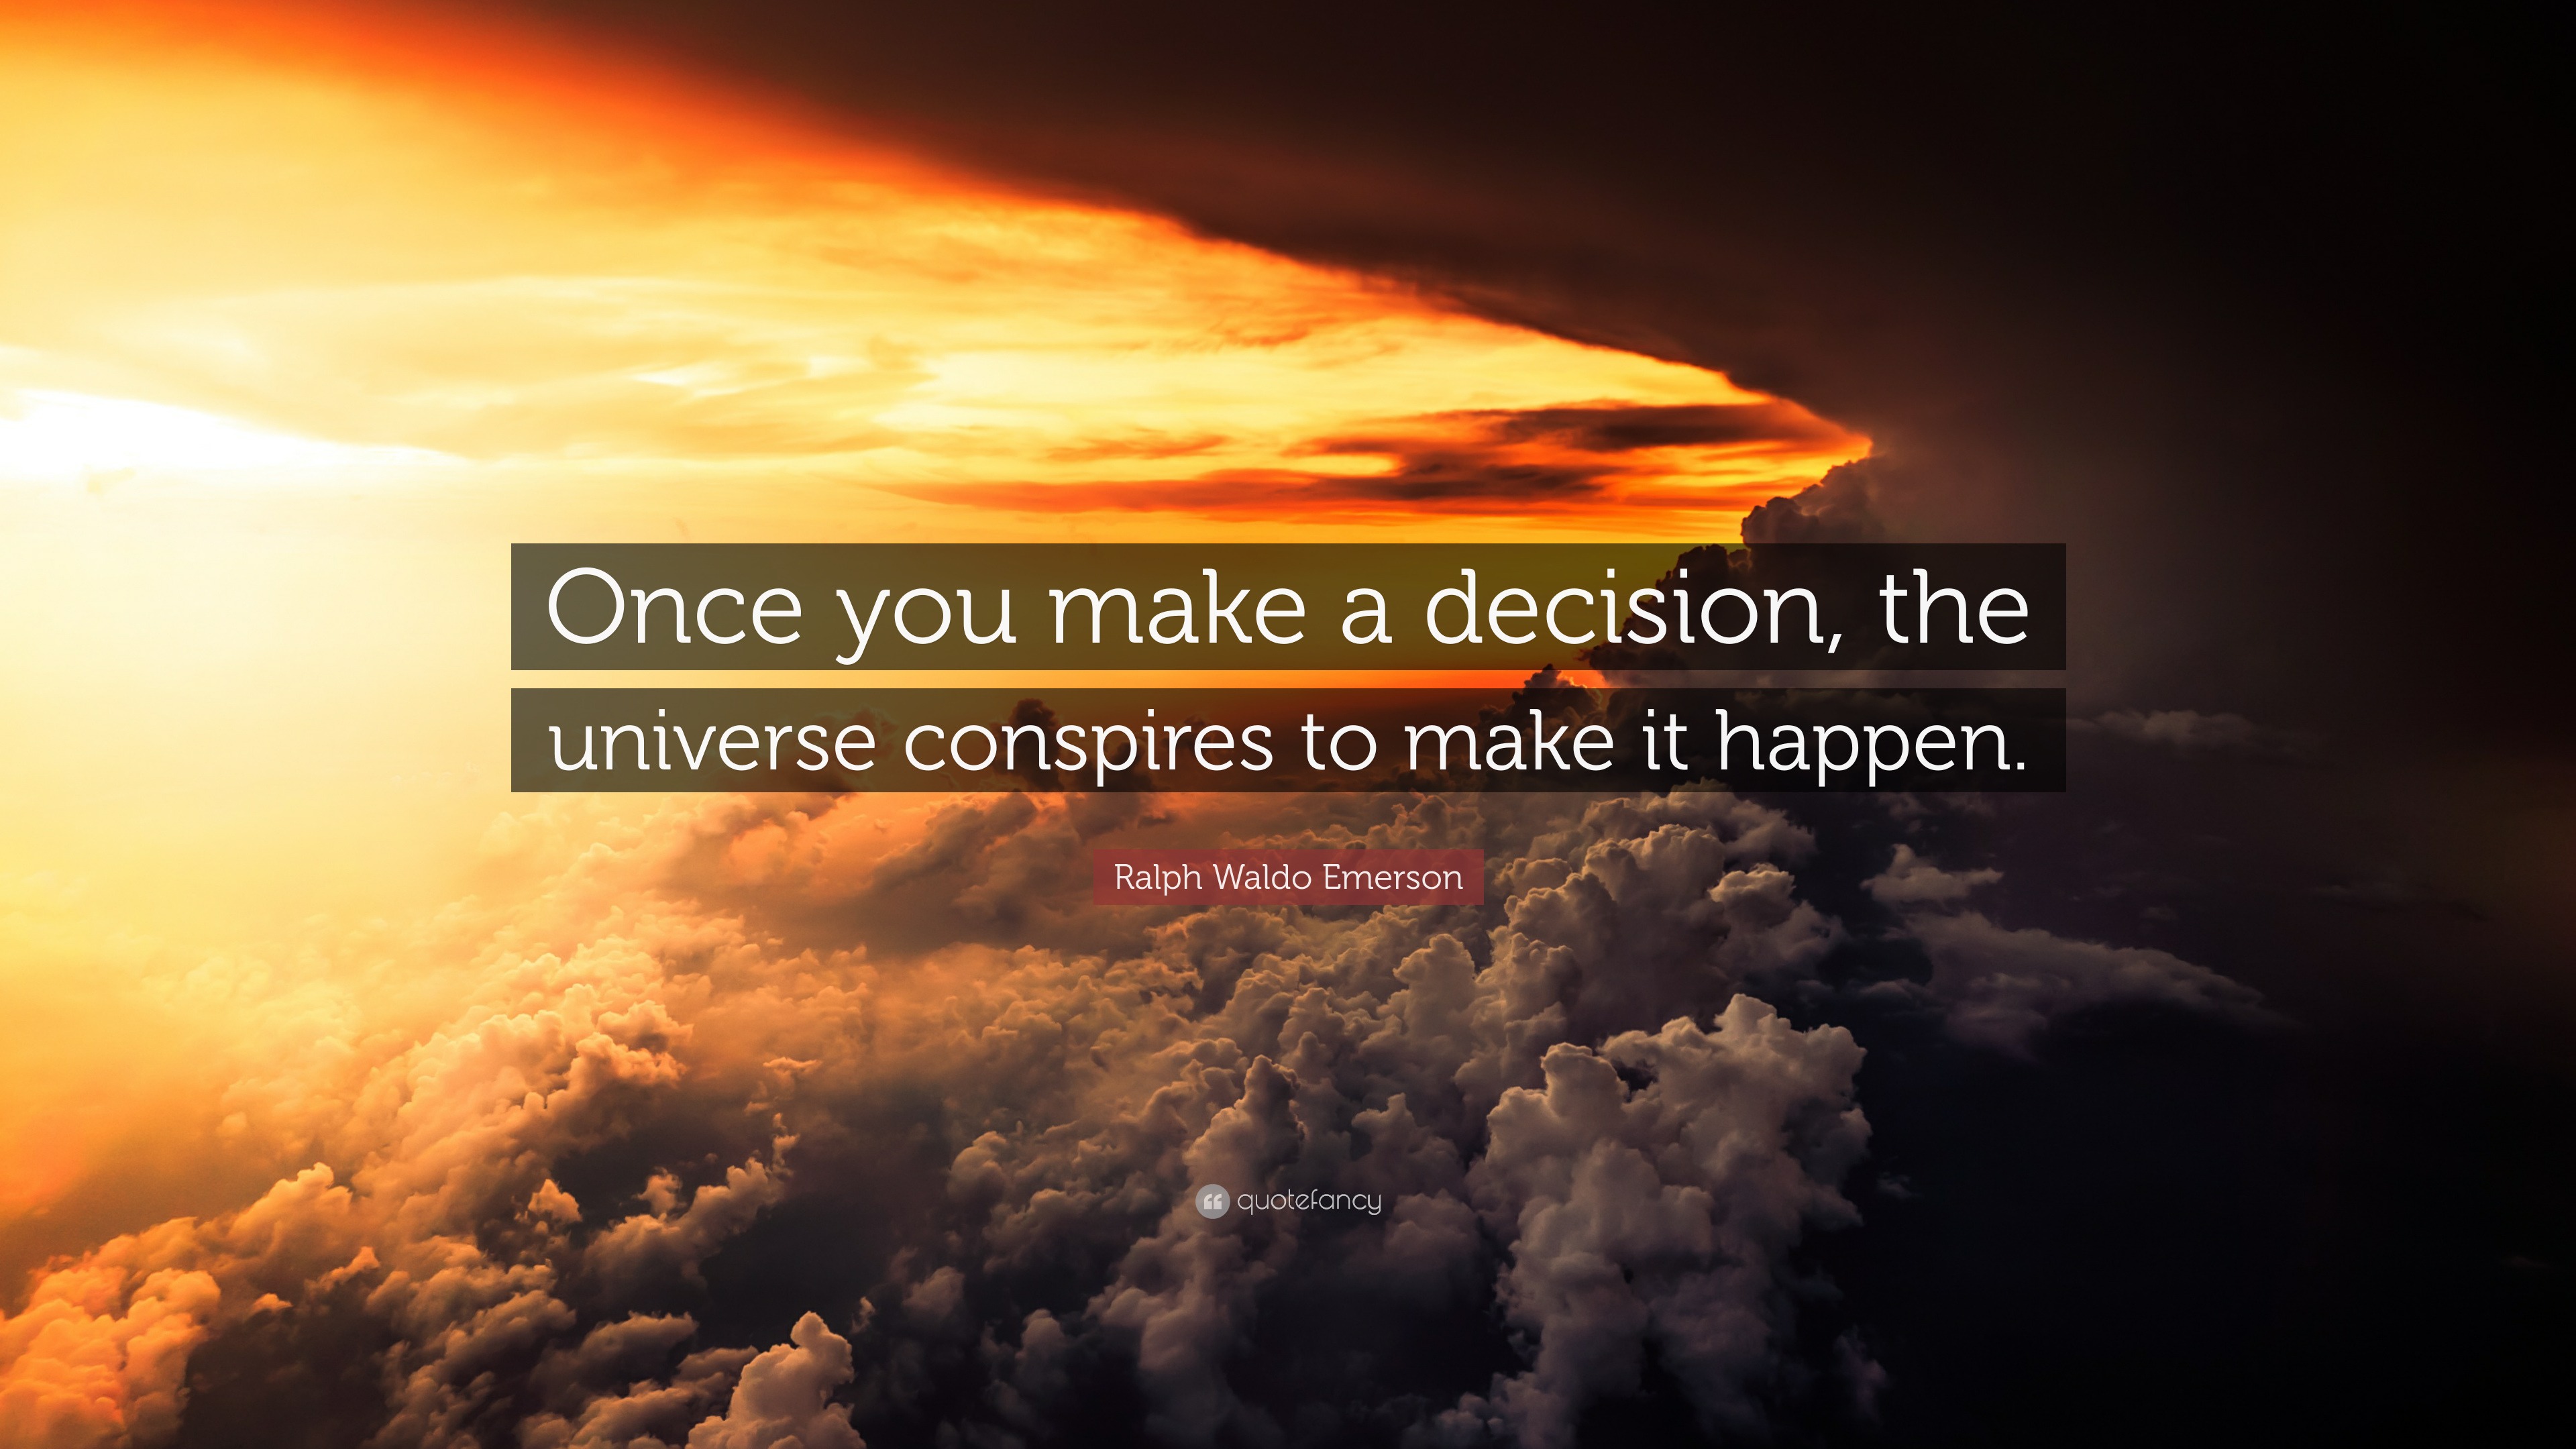 Ralph Waldo Emerson Quote: “Once you make a decision, the universe